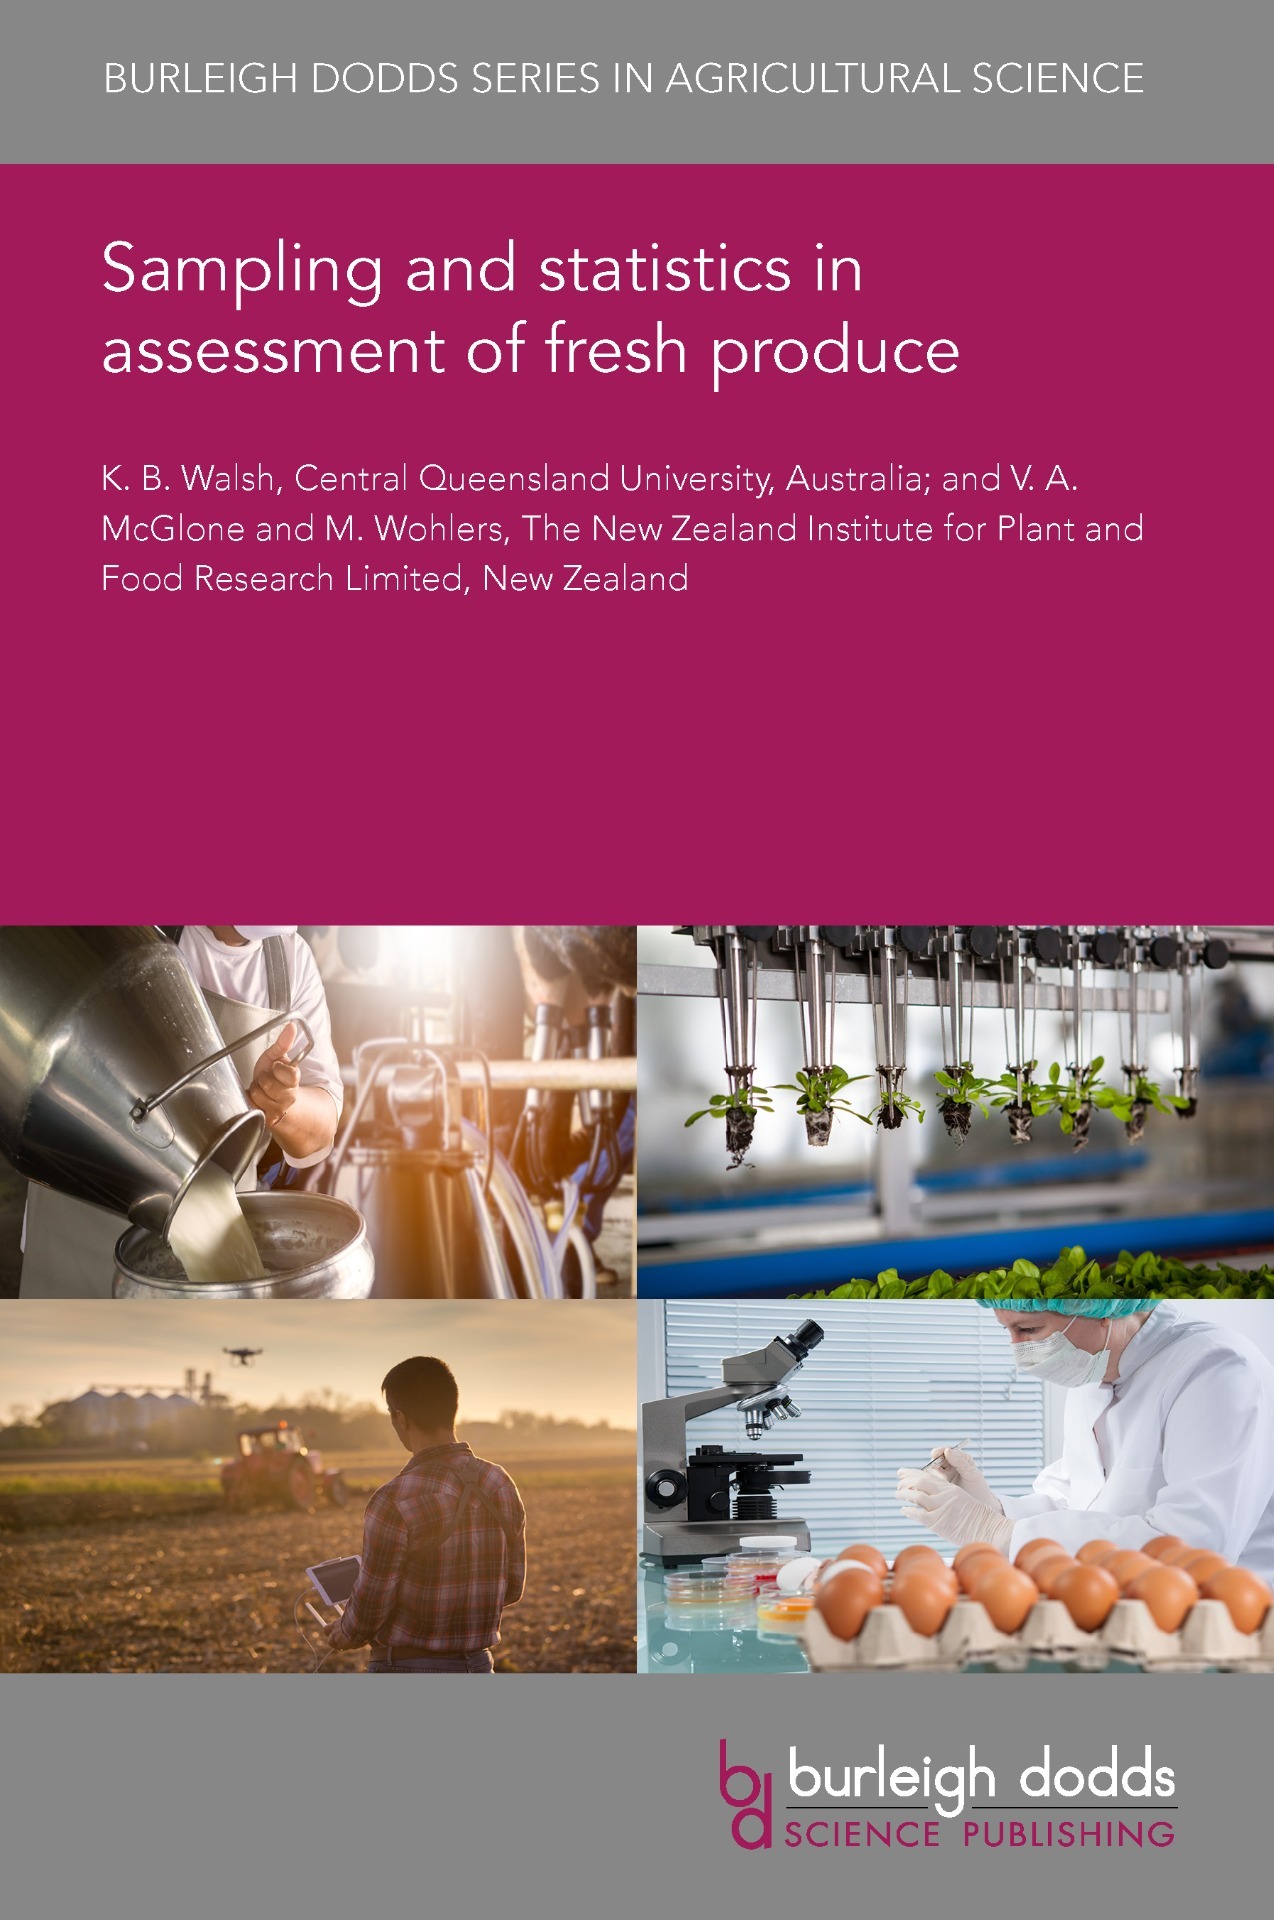 Sampling and statistics in assessment of fresh produce